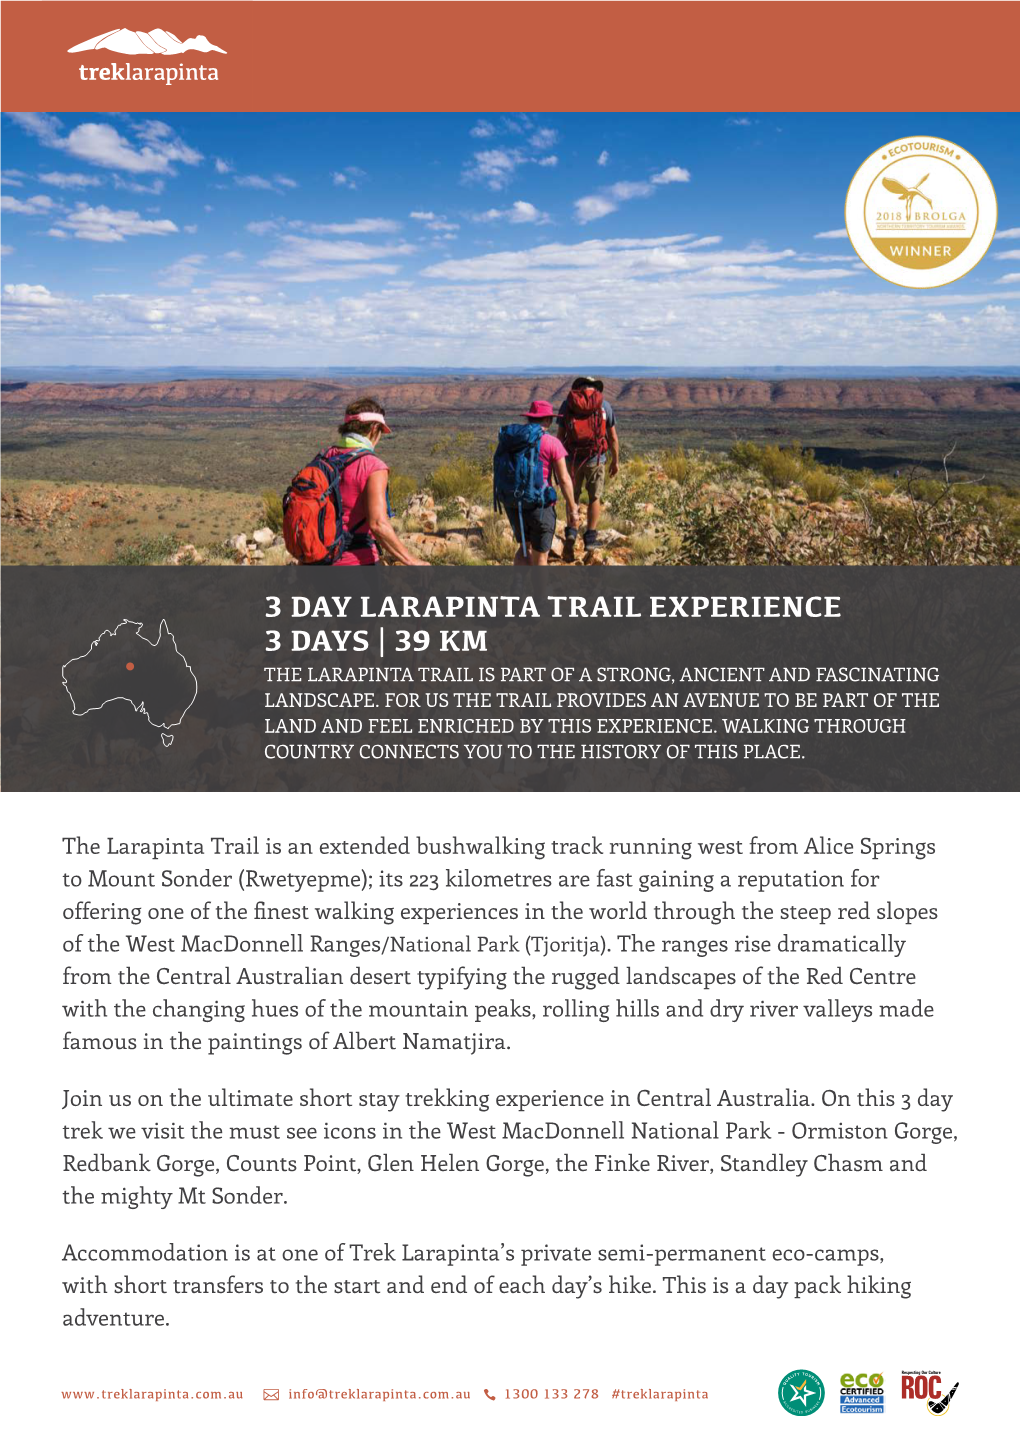 3 Day Larapinta Trail Experience 3 Days | 39 Km the Larapinta Trail Is Part of a Strong, Ancient and Fascinating Landscape